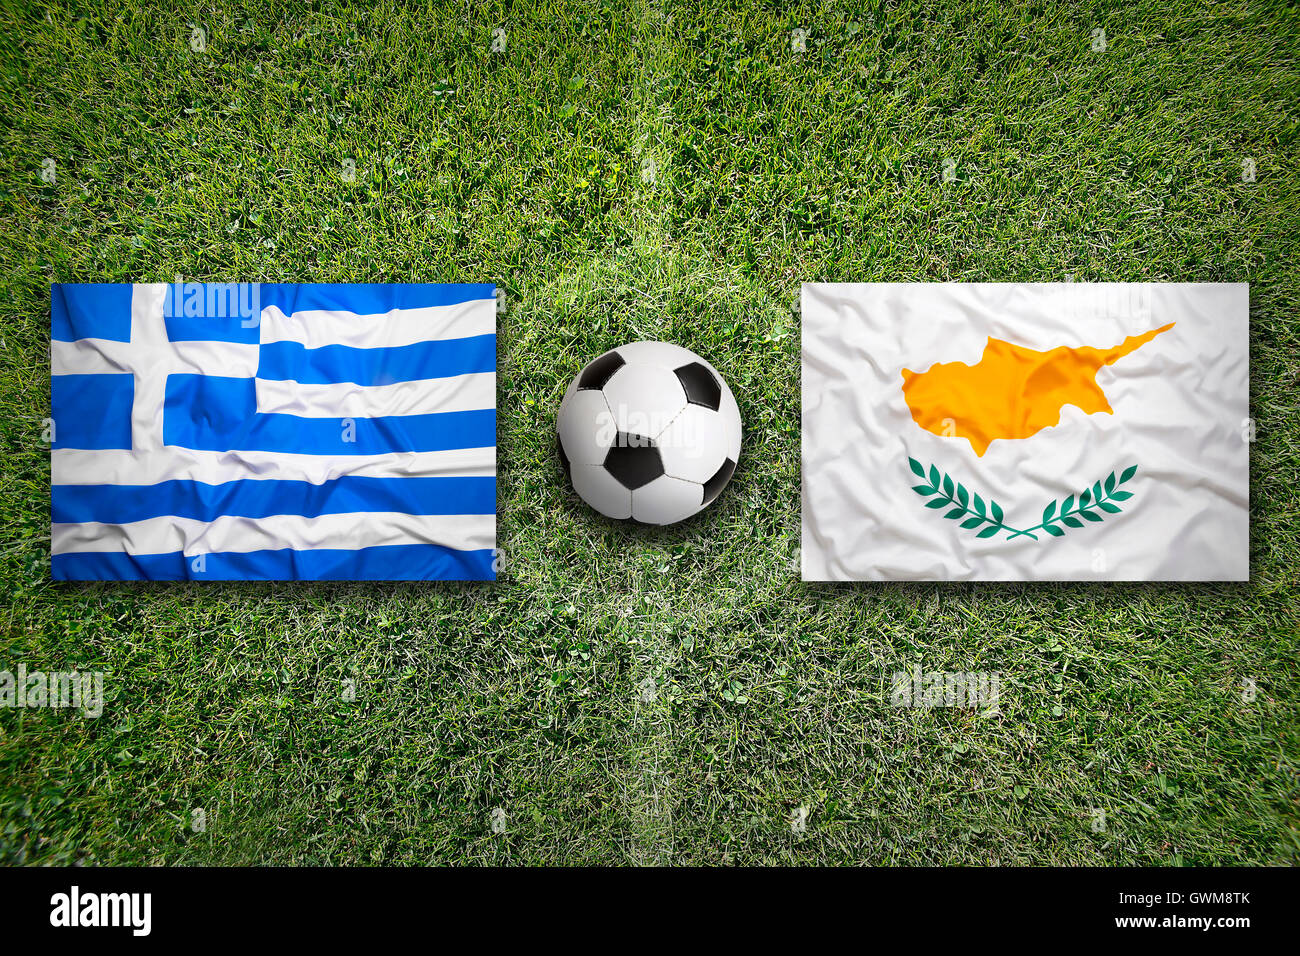 Greece and Cyprus flags on a green soccer field Stock Photo